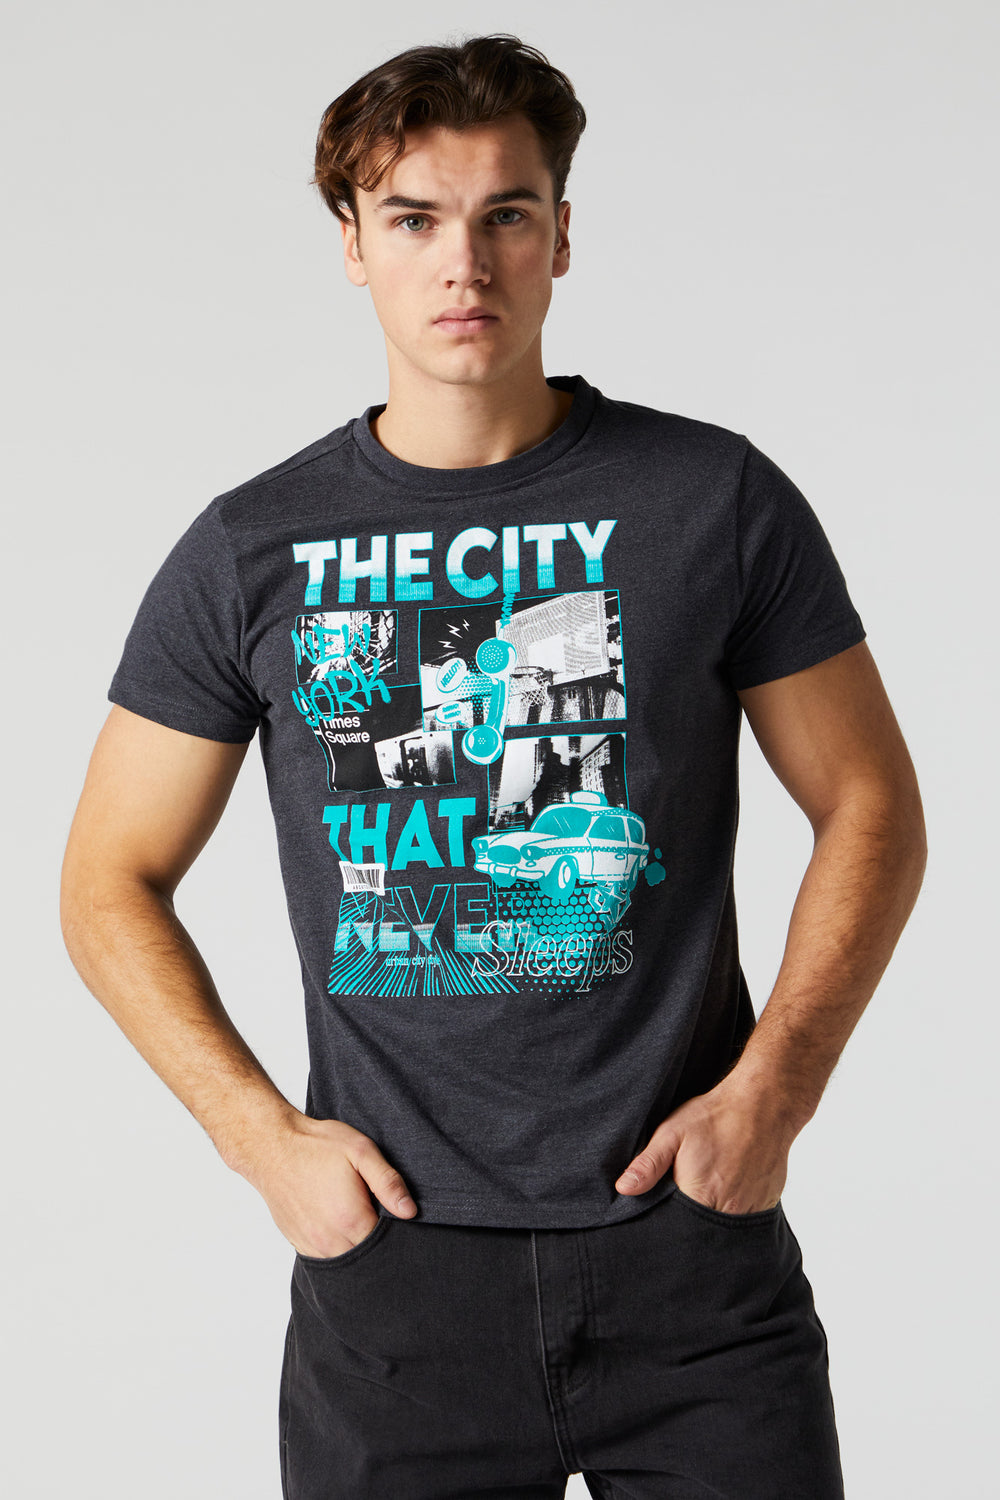 The City That Never Sleeps Graphic T-Shirt The City That Never Sleeps Graphic T-Shirt 2